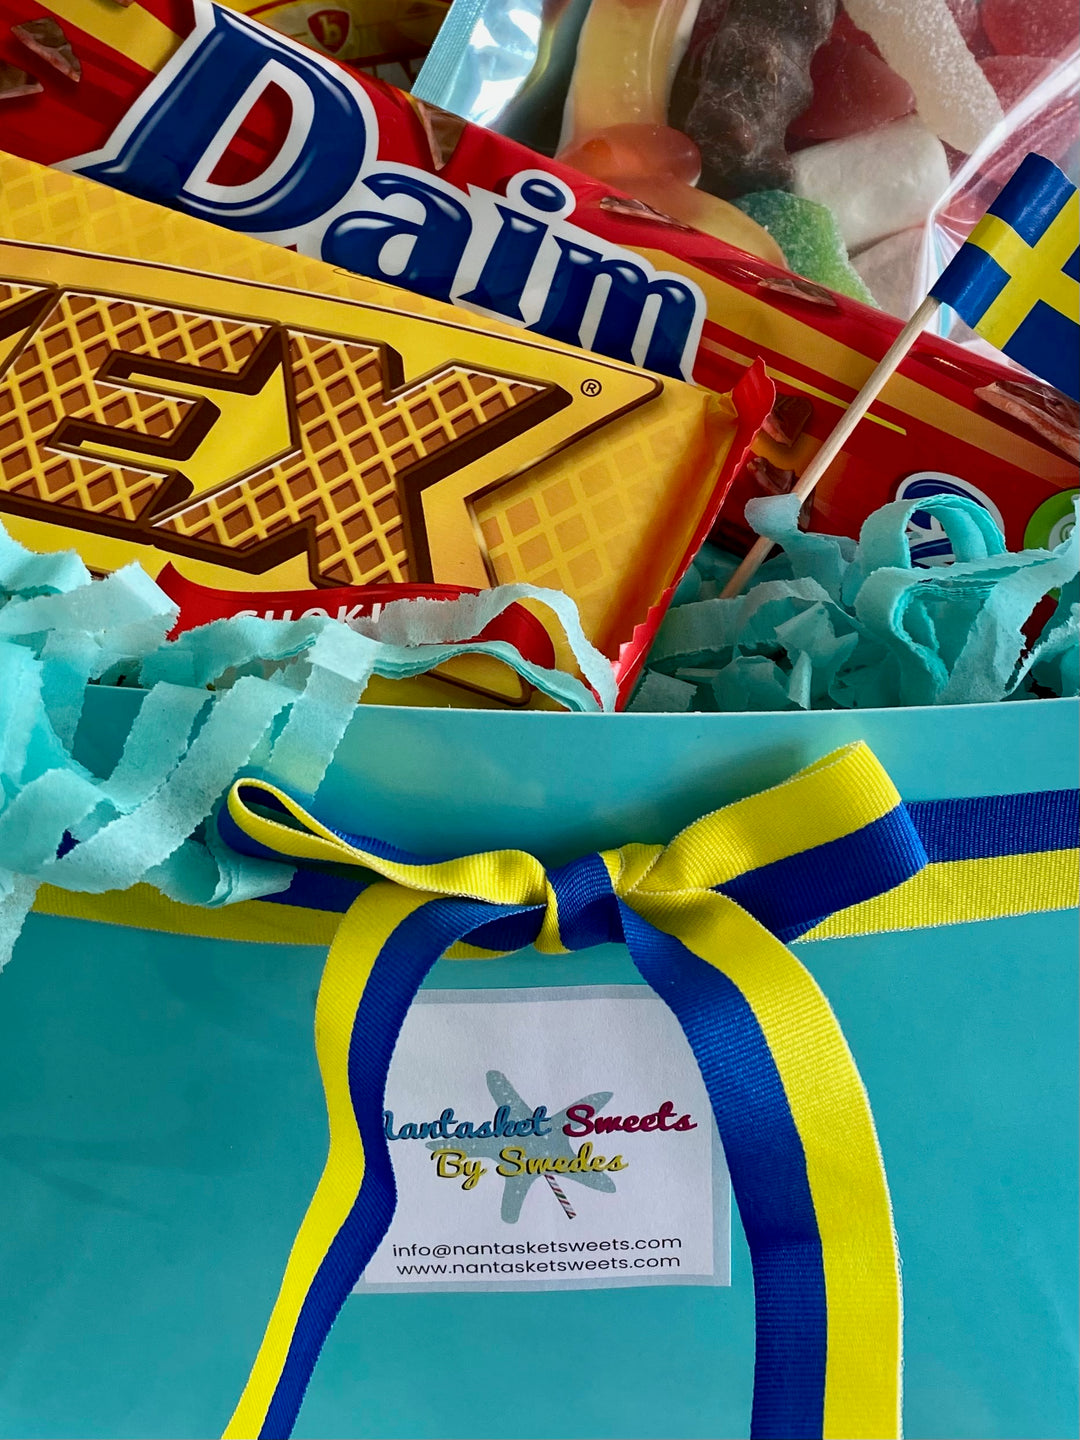 The Swede Box Gift Package